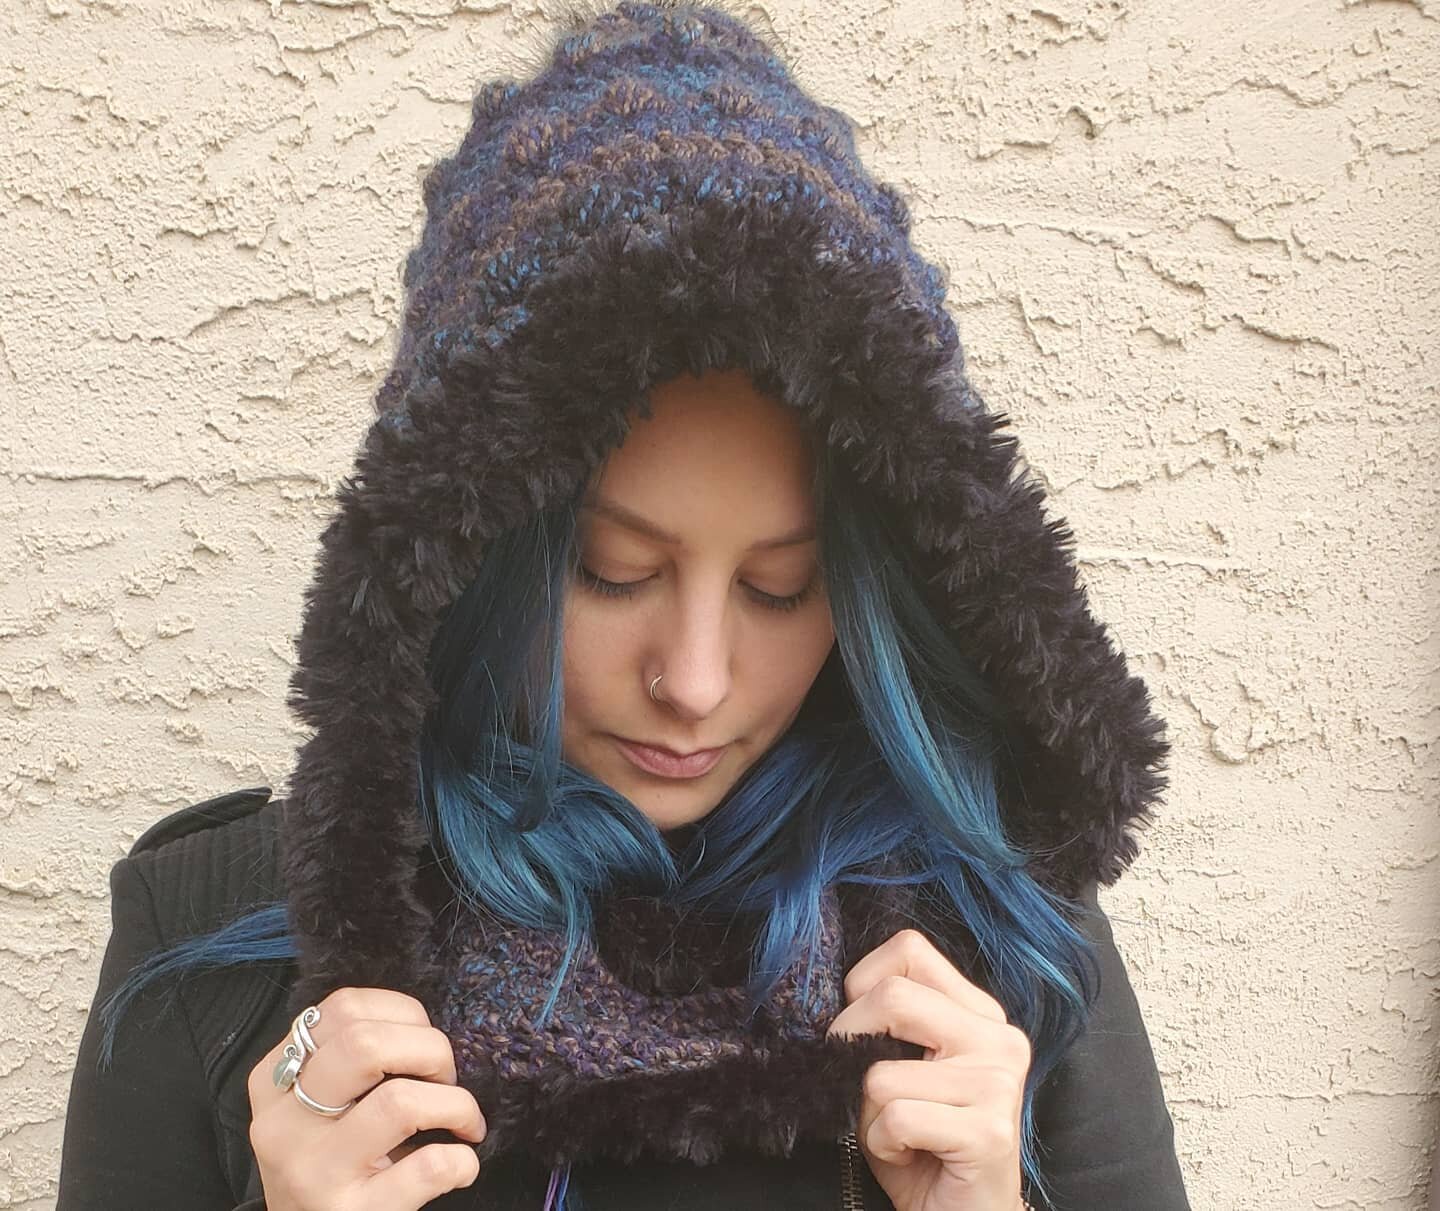 Stay warm and dry out there folks. The winter is coming in strong this year! 

It's a long weekend here in Canada and today will be spent watching Twitch Streams with some hot tea by the fire

What are you doing today?

Pattern: Hooded Puff Cowl by M